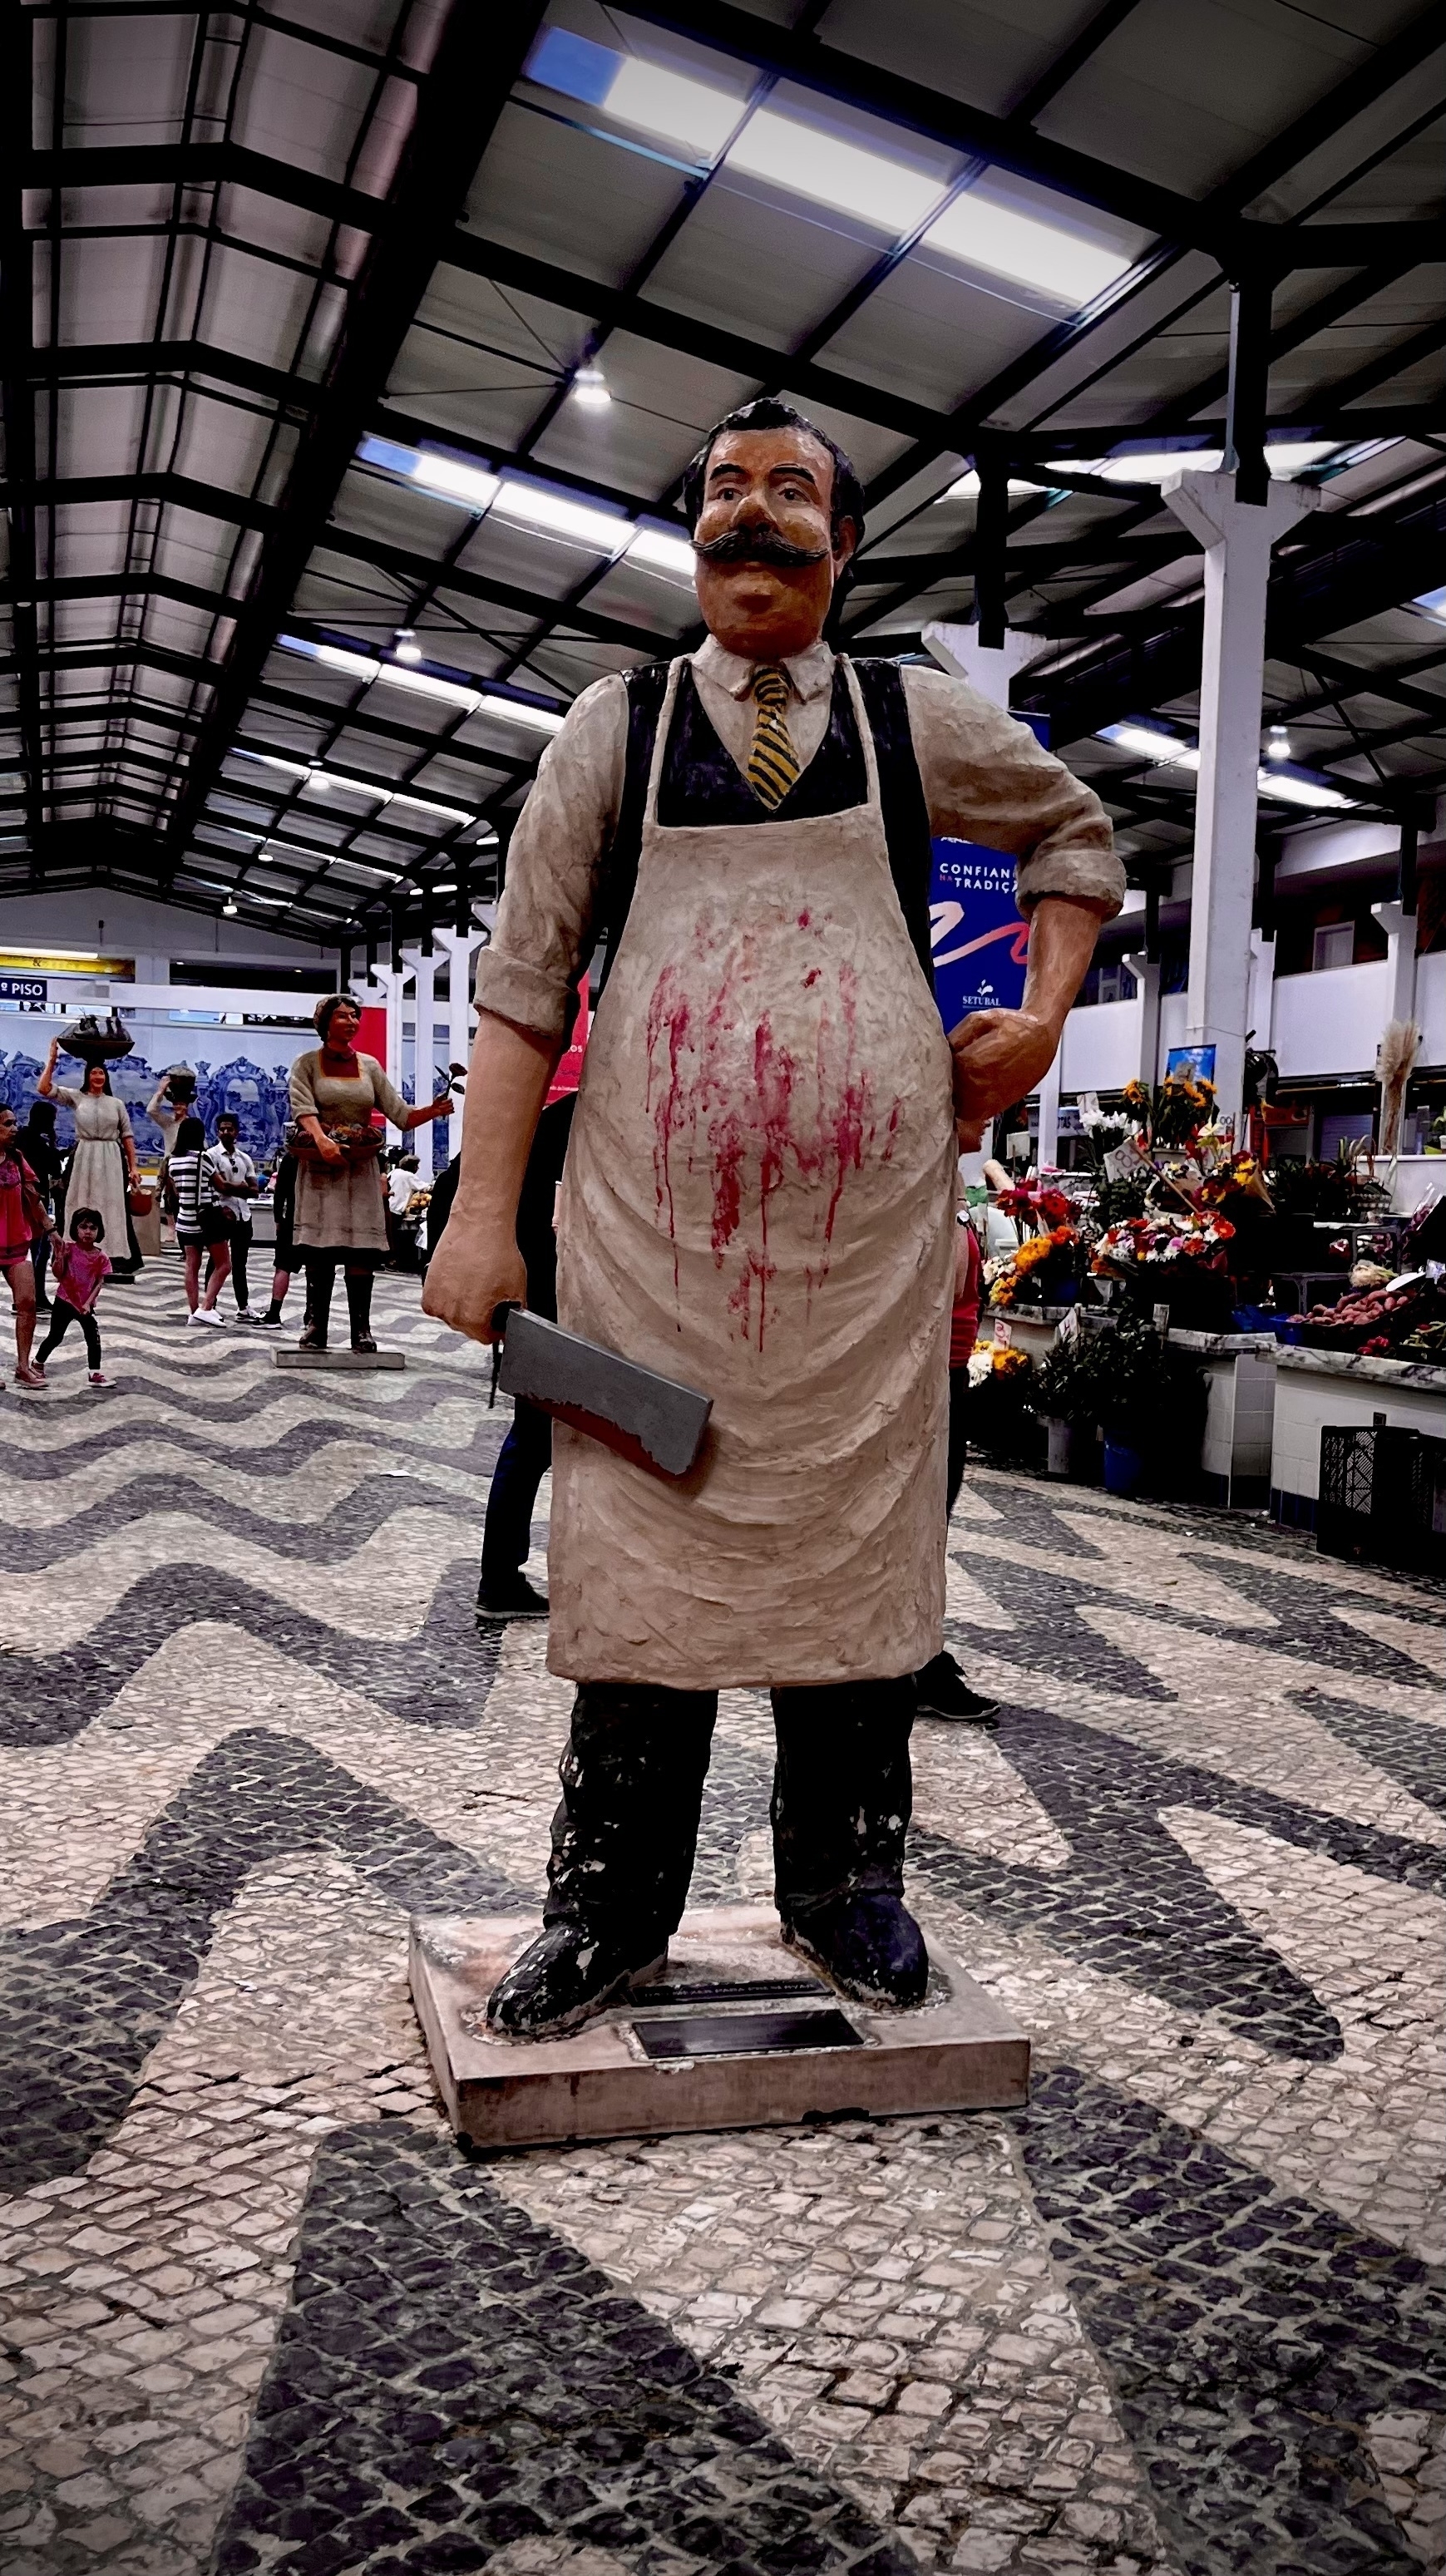 Big model of a butcher, with a bloodied clever and apron, at Setúbal market